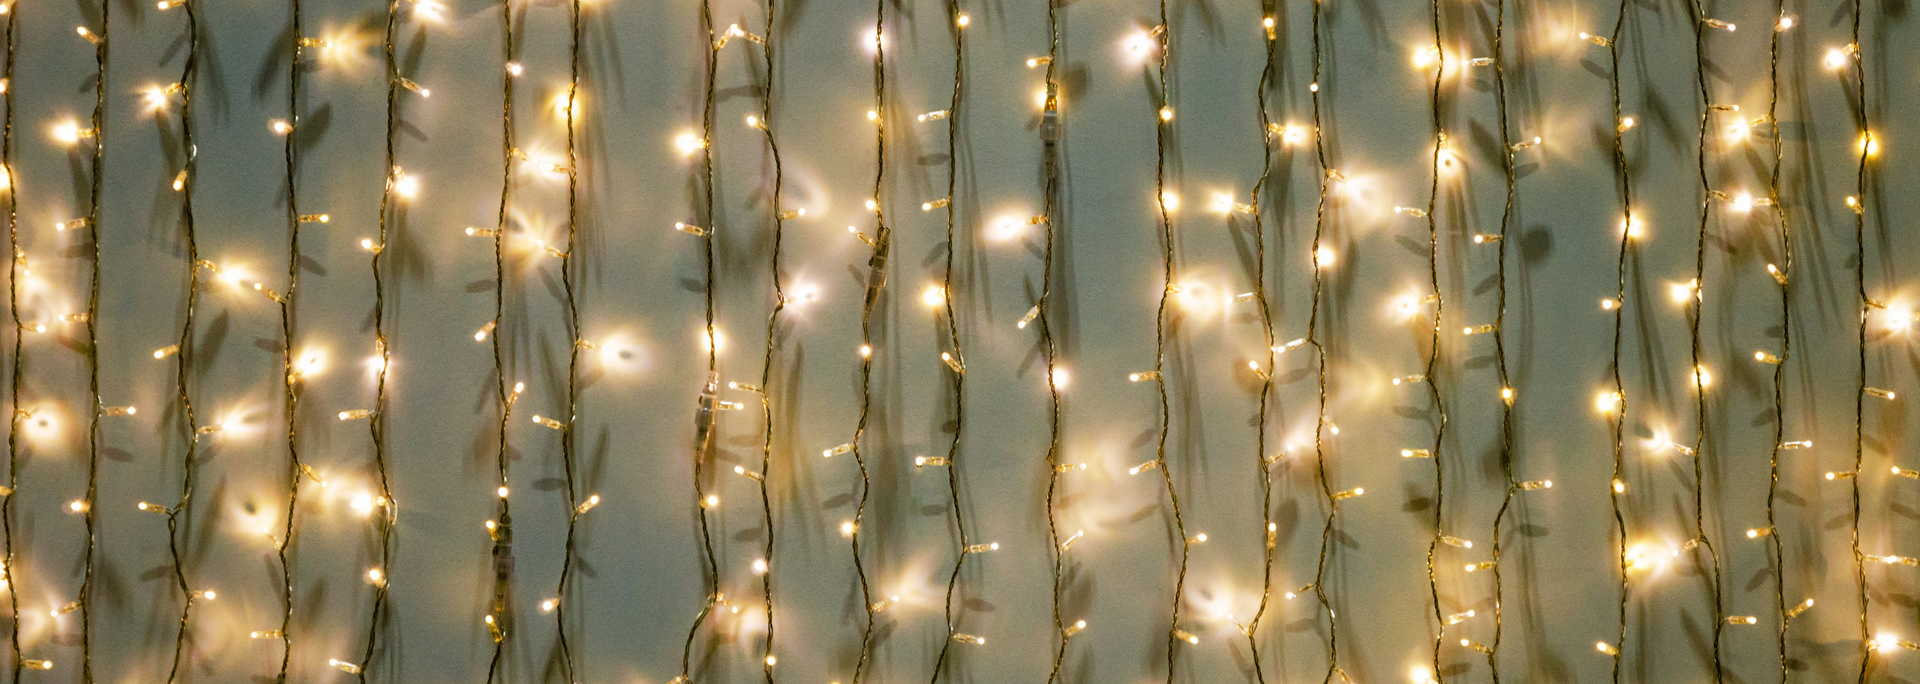 Picture of some string lights 